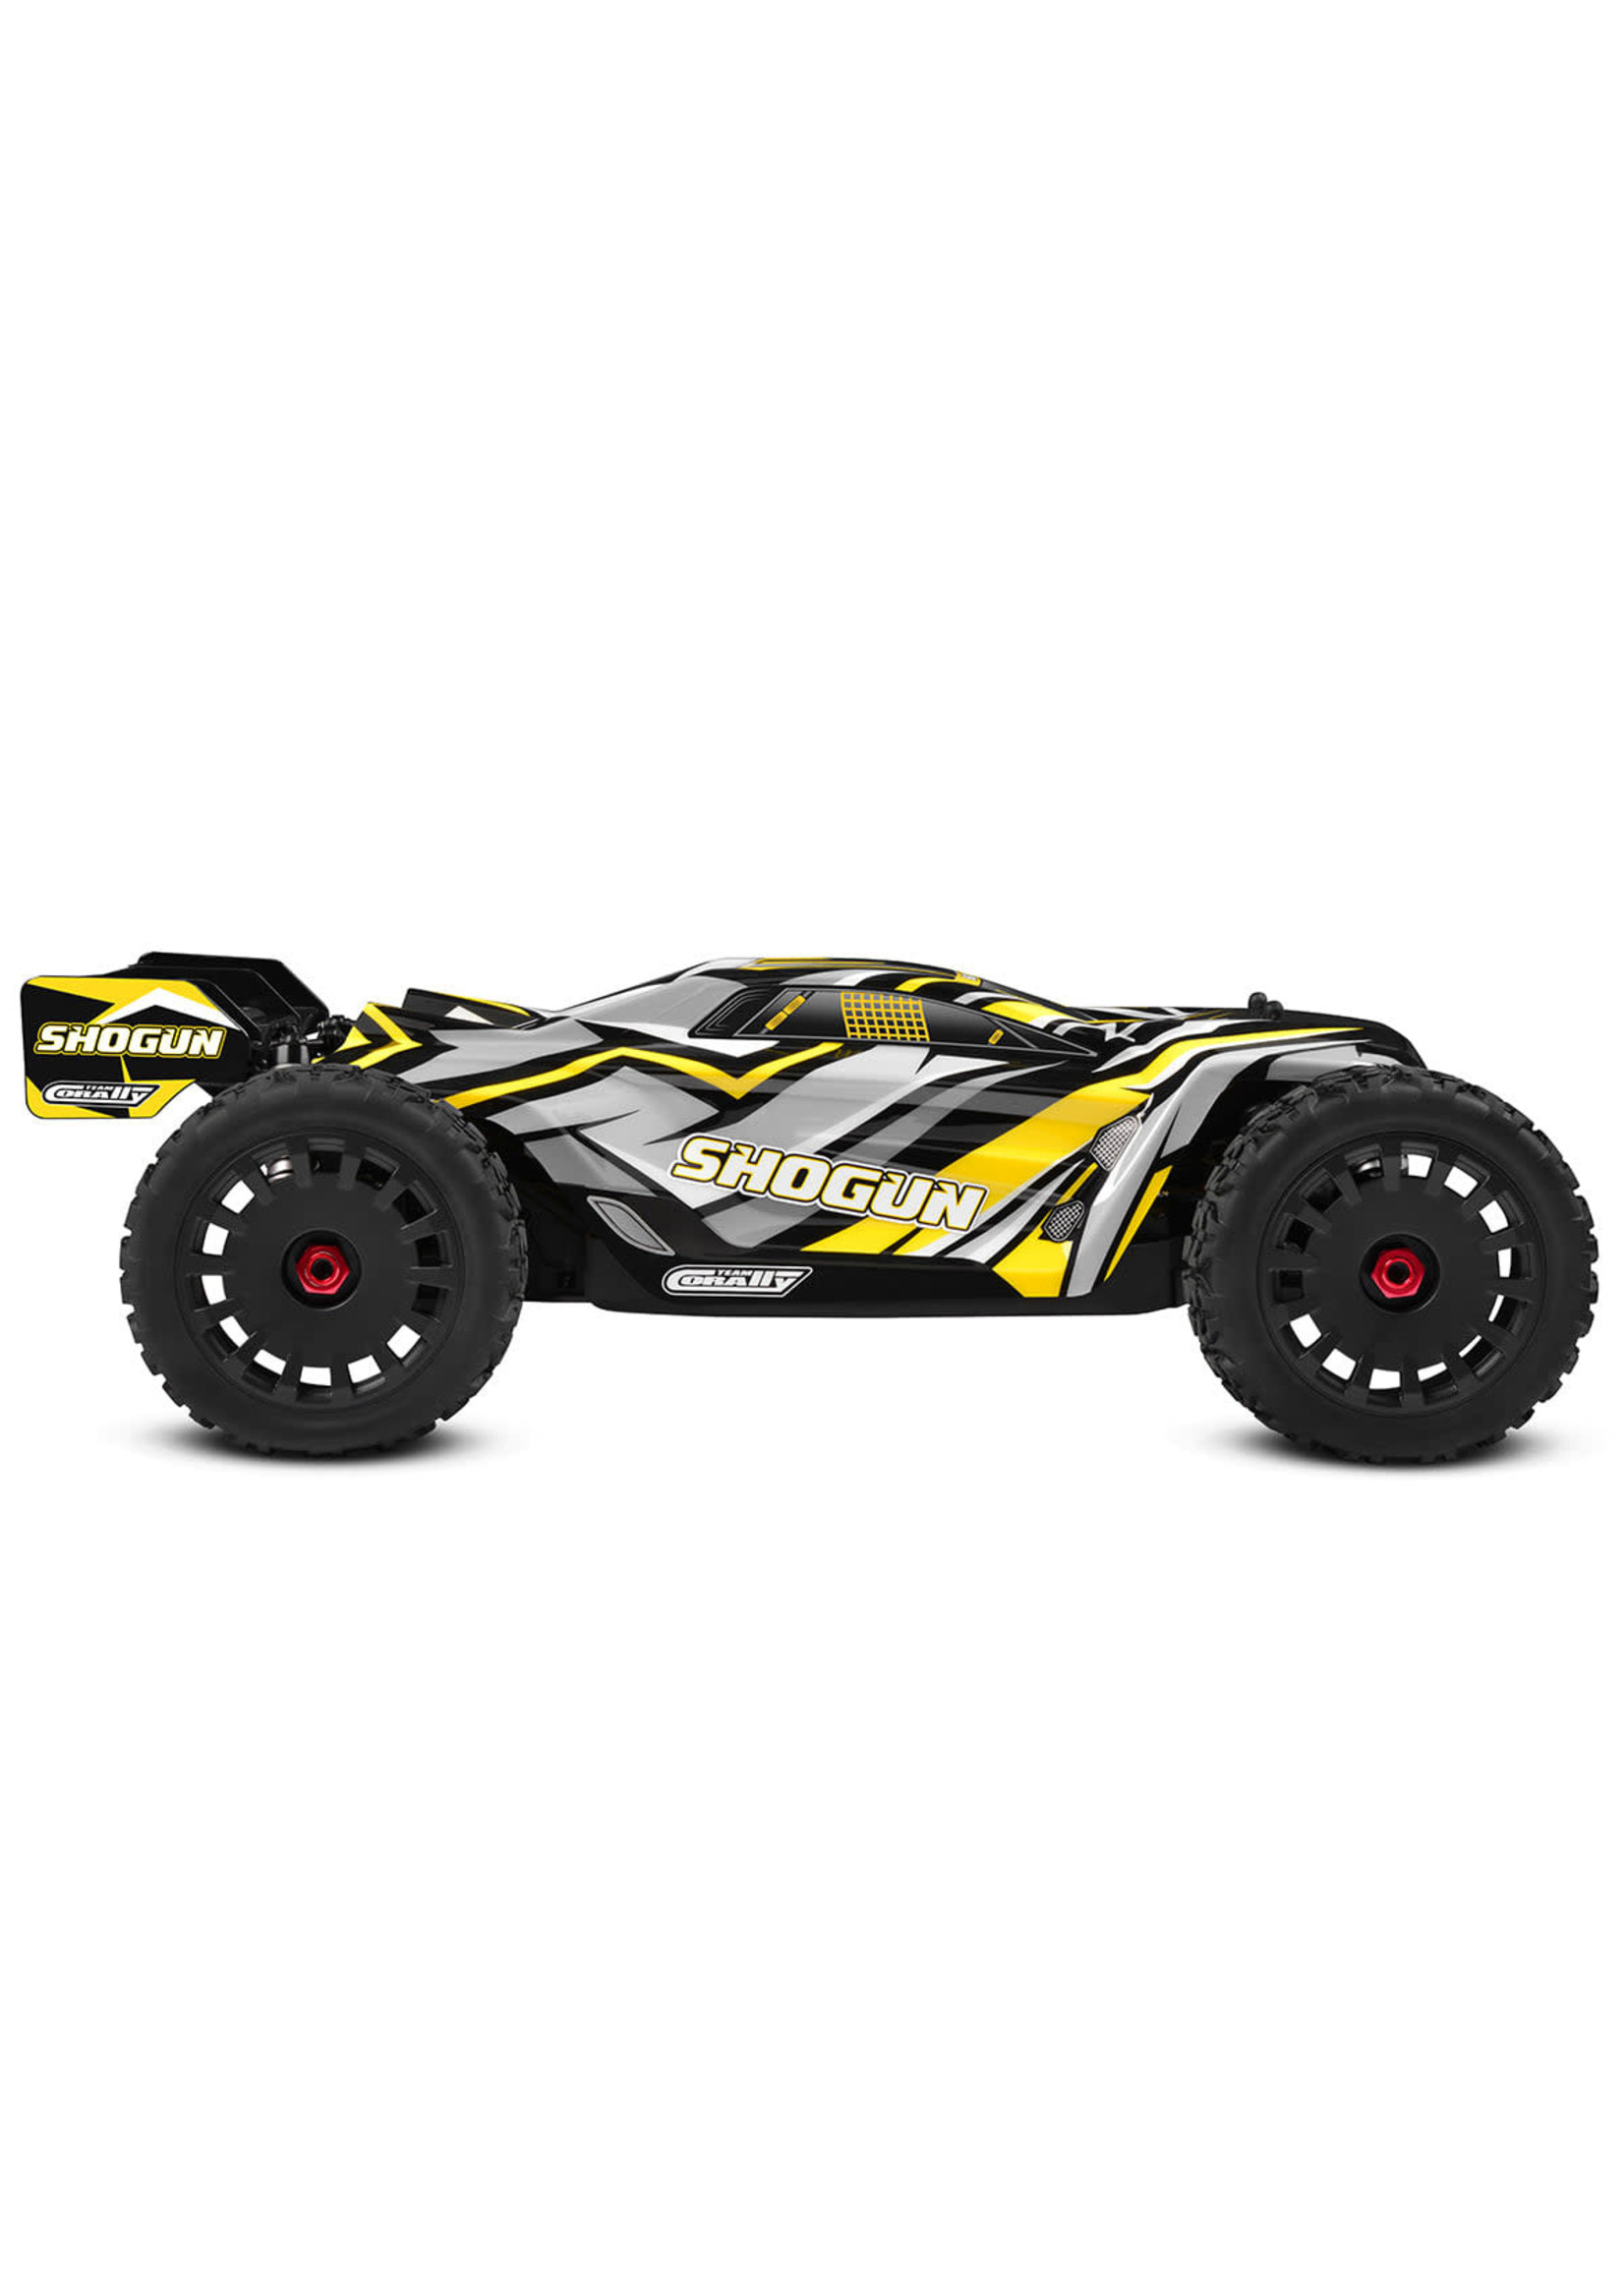 Team Corally COR00177 Team Corally 1/8 Shogun XP 4WD Truggy 6S Brushless RTR (No Battery or Charger)